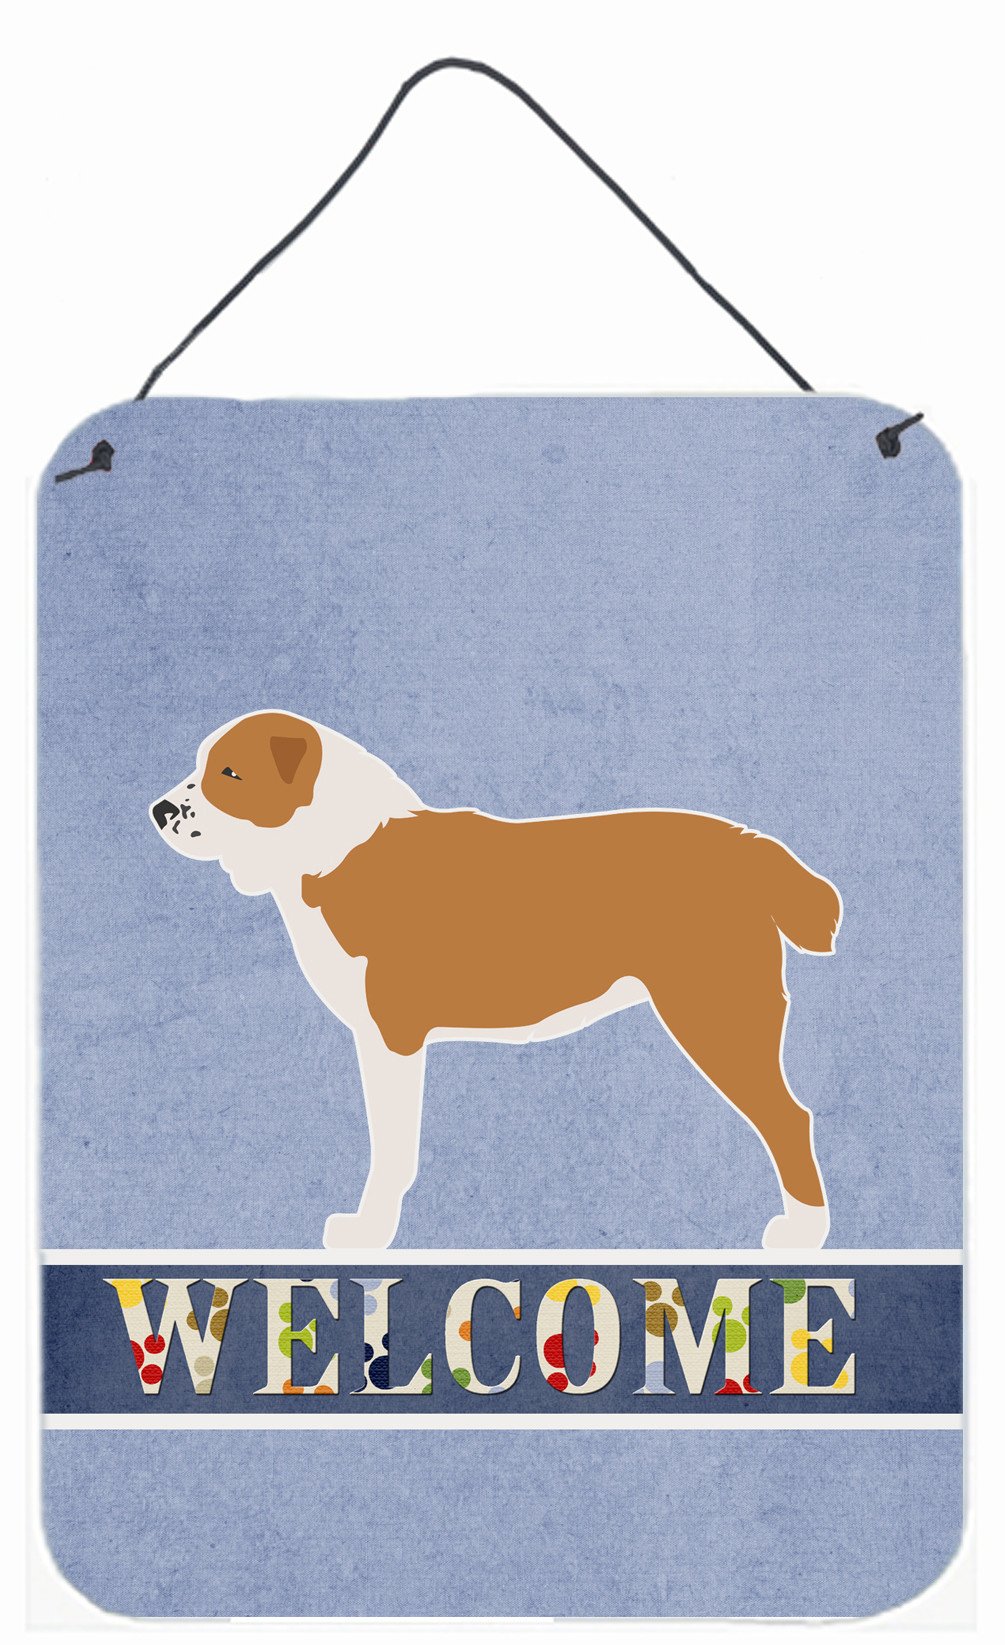 Central Asian Shepherd Dog Welcome Wall or Door Hanging Prints BB5532DS1216 by Caroline's Treasures